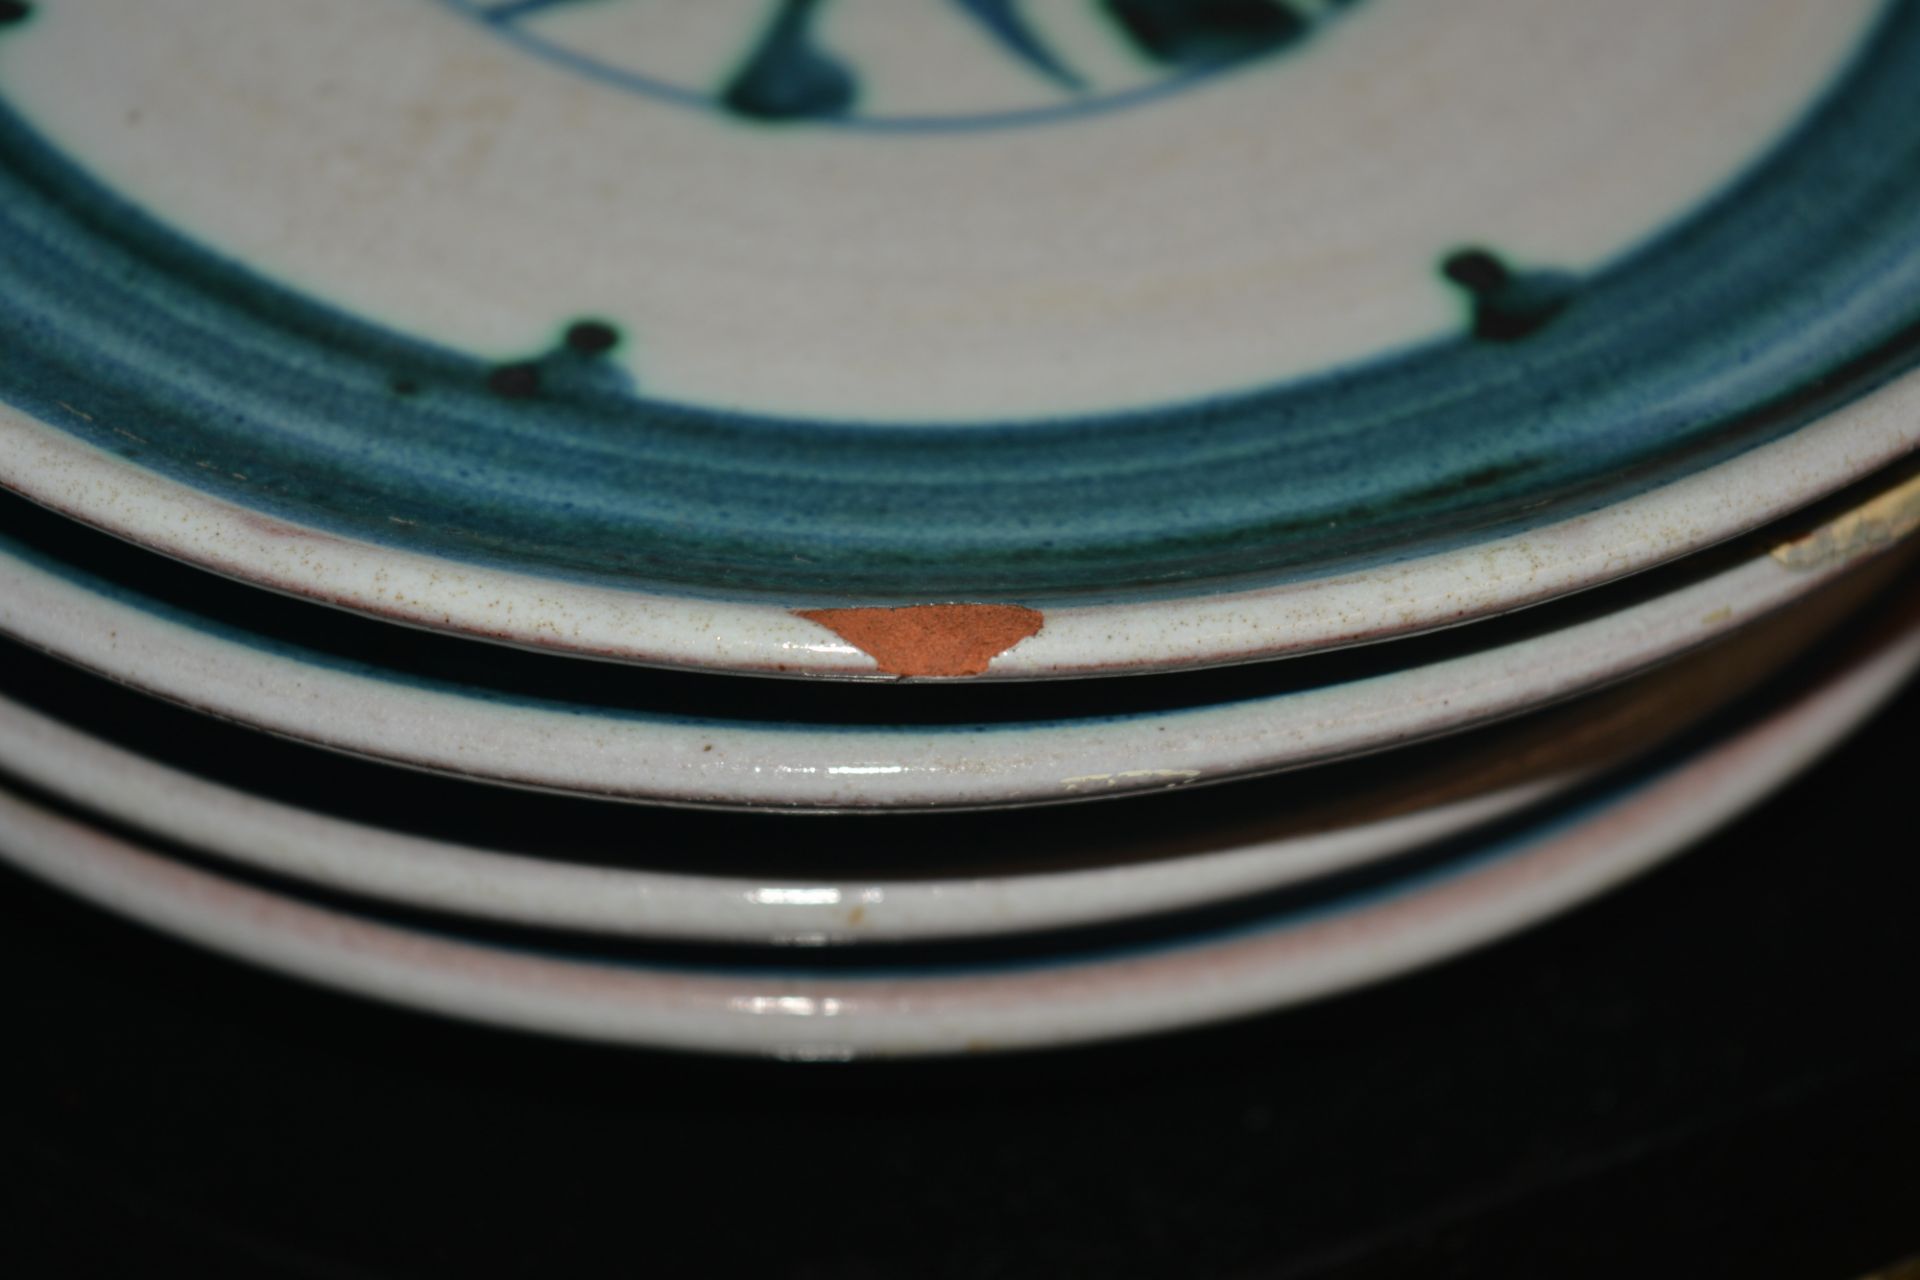 Alan Caiger-Smith (1930-2020) at Aldermaston Pottery tin-glazed earthenware dinner service, to - Image 8 of 21